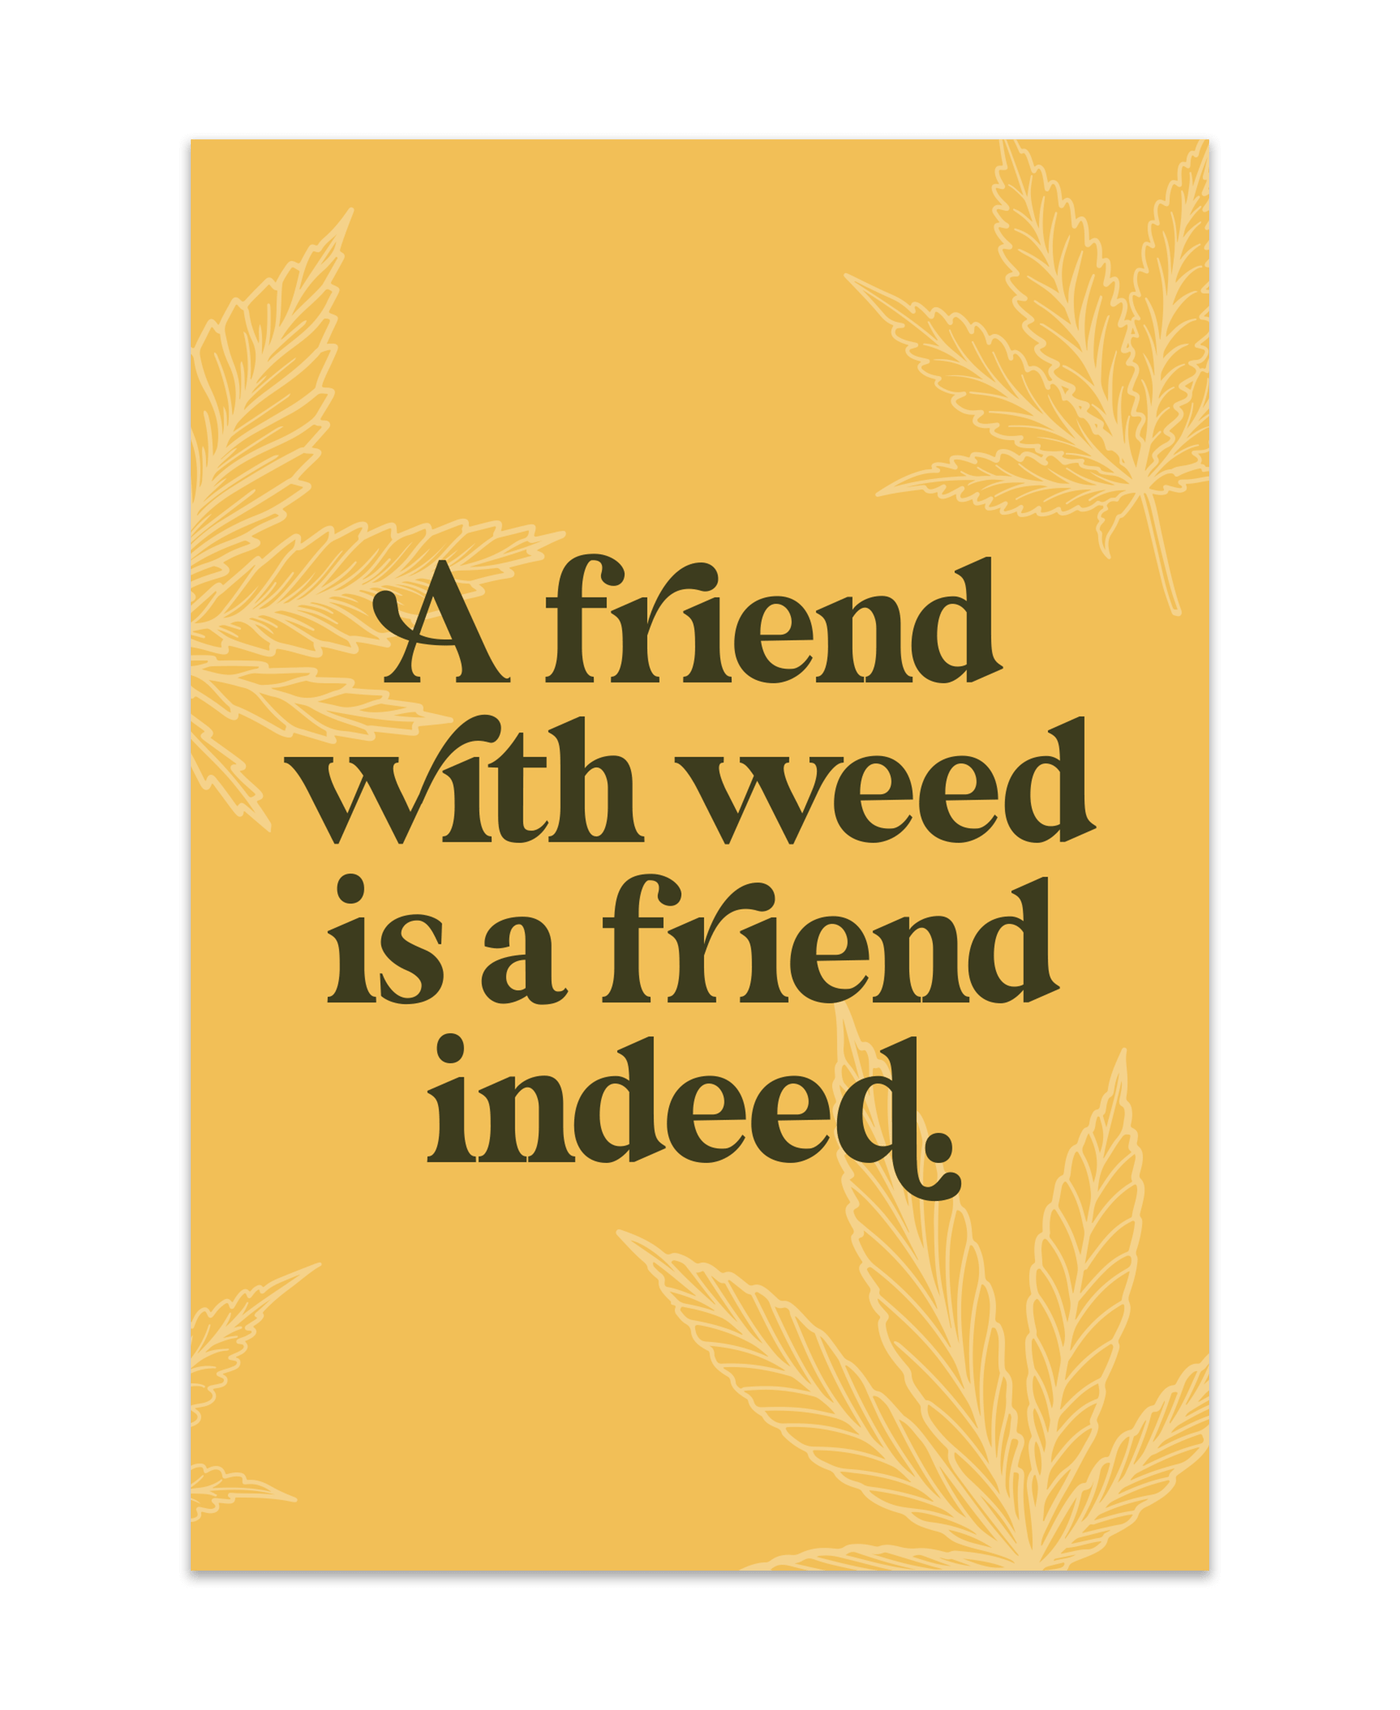 yellow 420 Friendly Greeting Card that says "A Friend with weed is a friend indeed" in black bold text